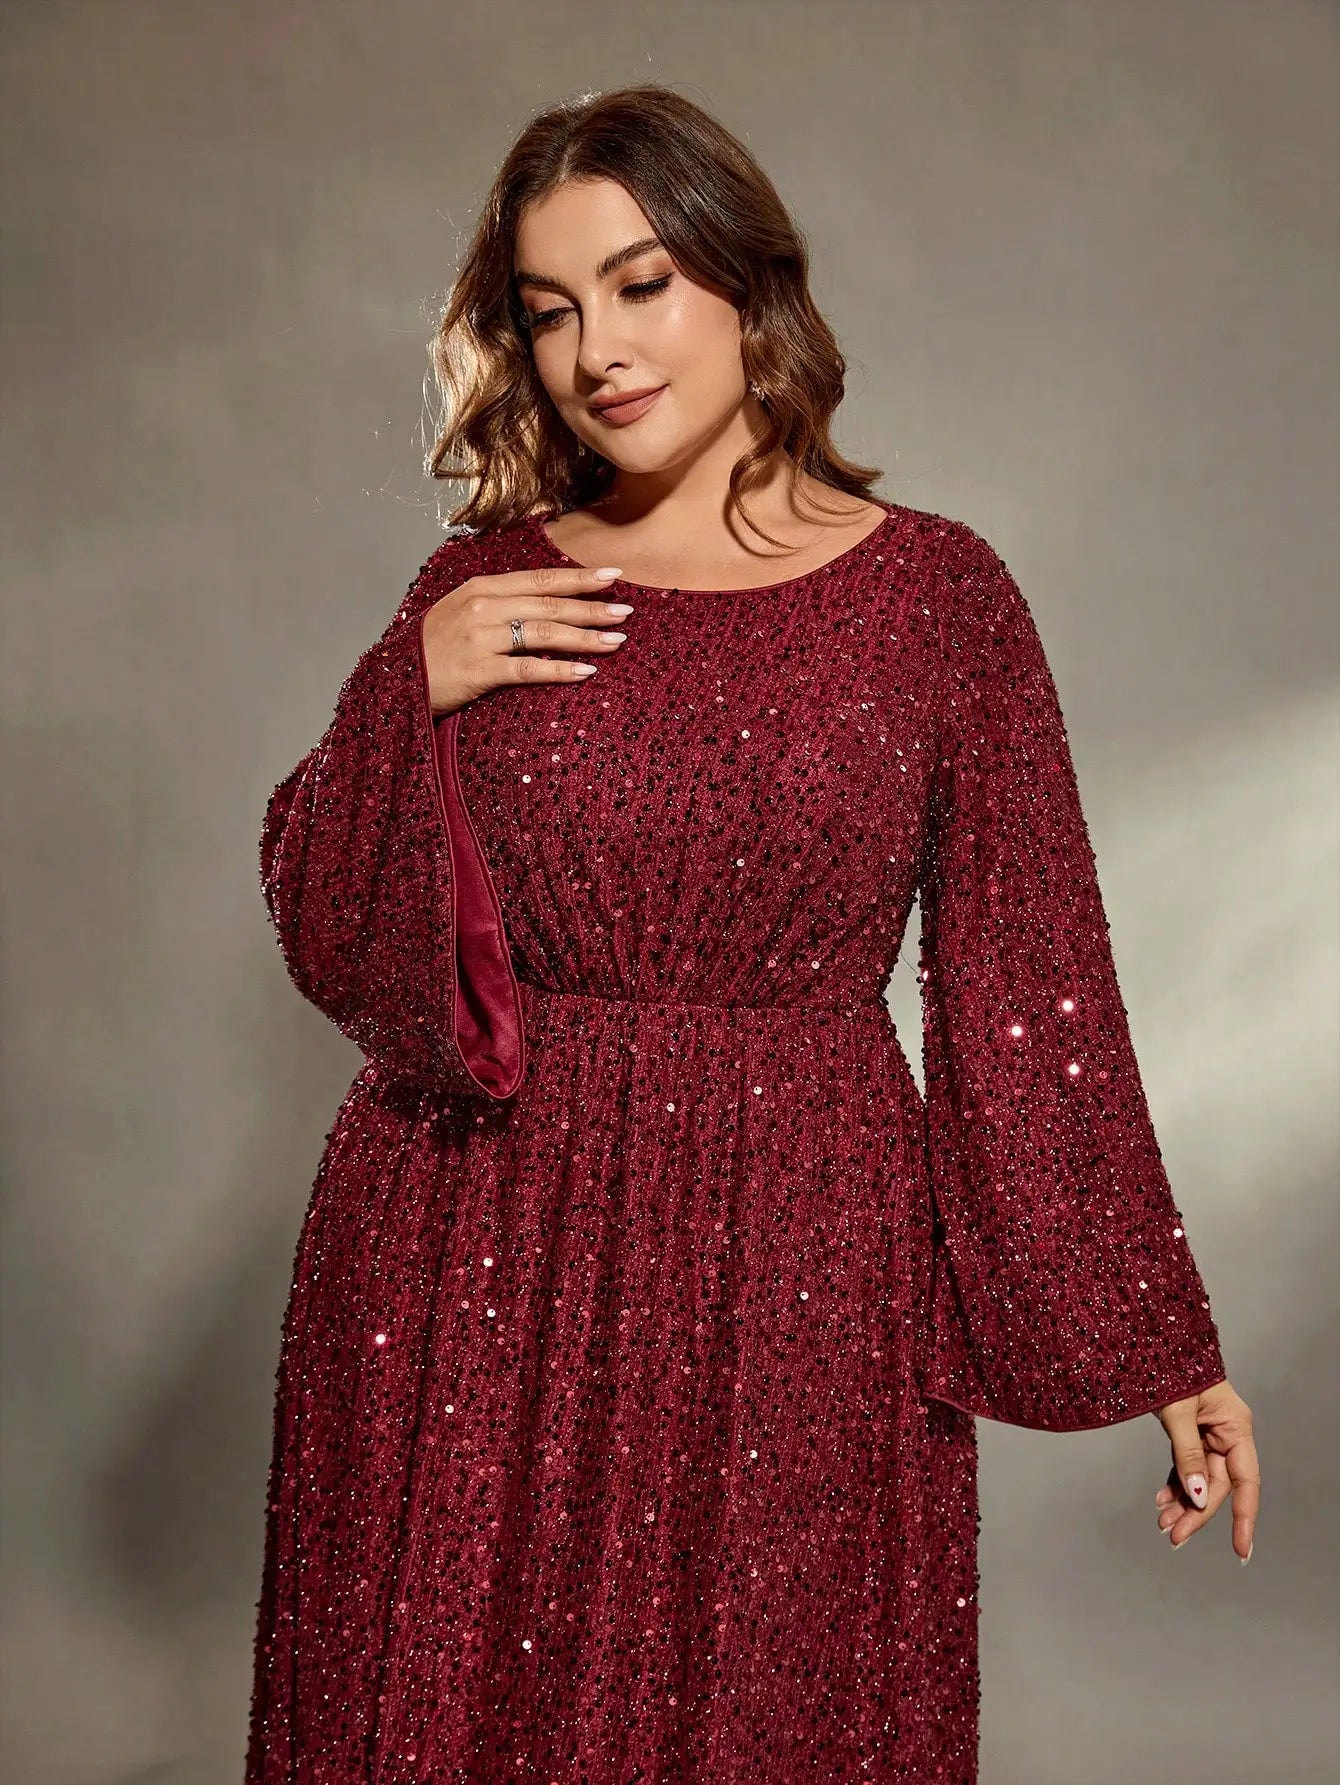 Mgiacy  plus size  Round neck flared sleeves bust pleated sequins A full skirt Evening gown PROM dress Party dress